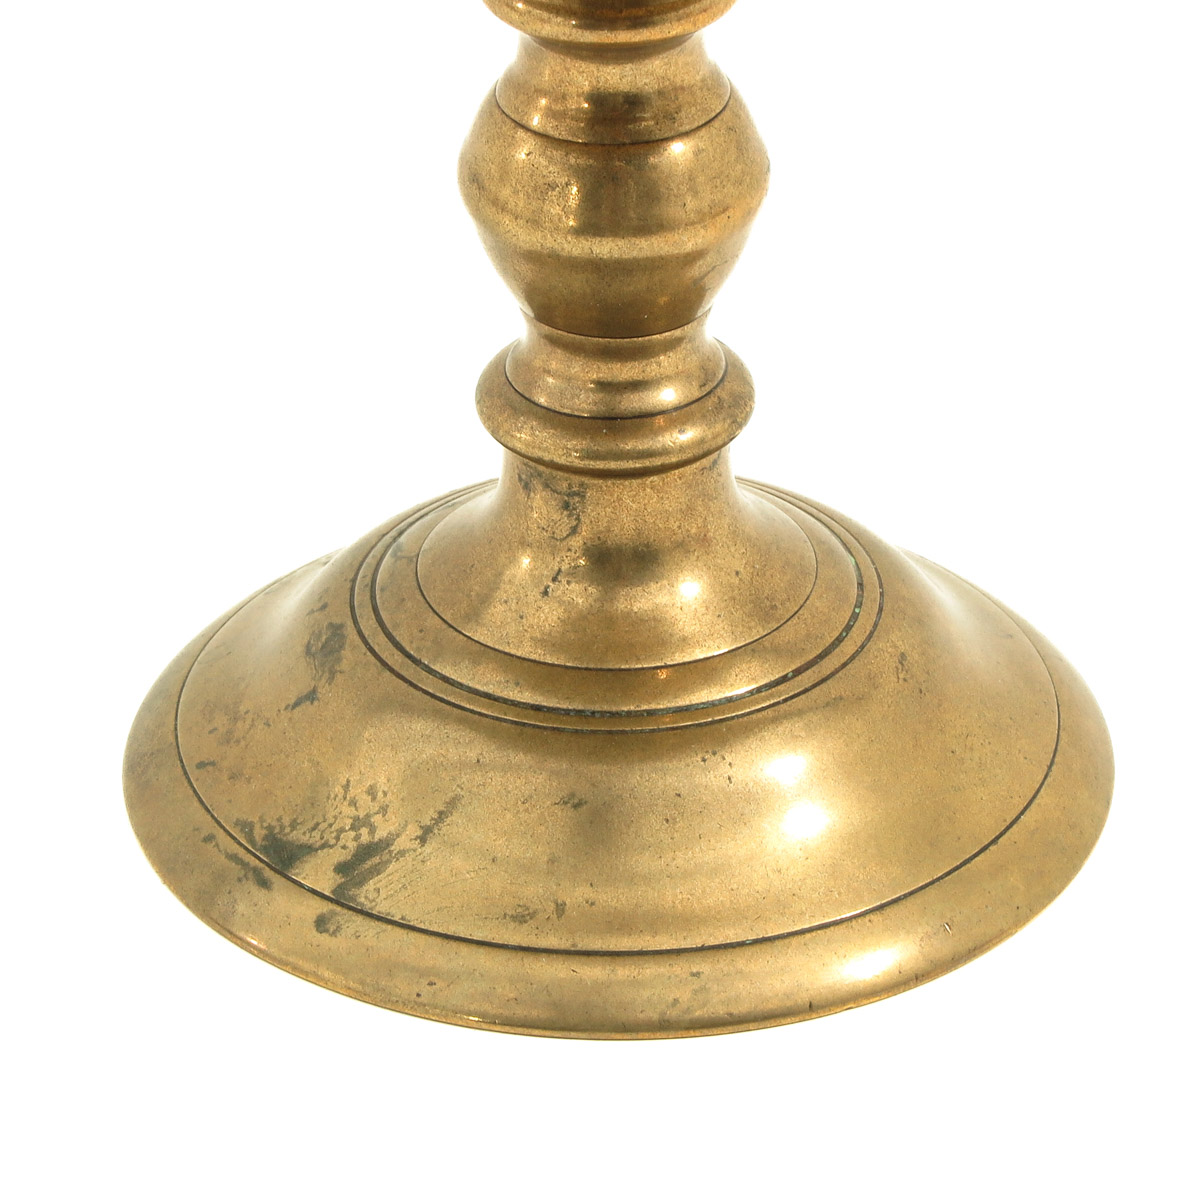 A 17th Century Dutch Candlestick - Image 8 of 8